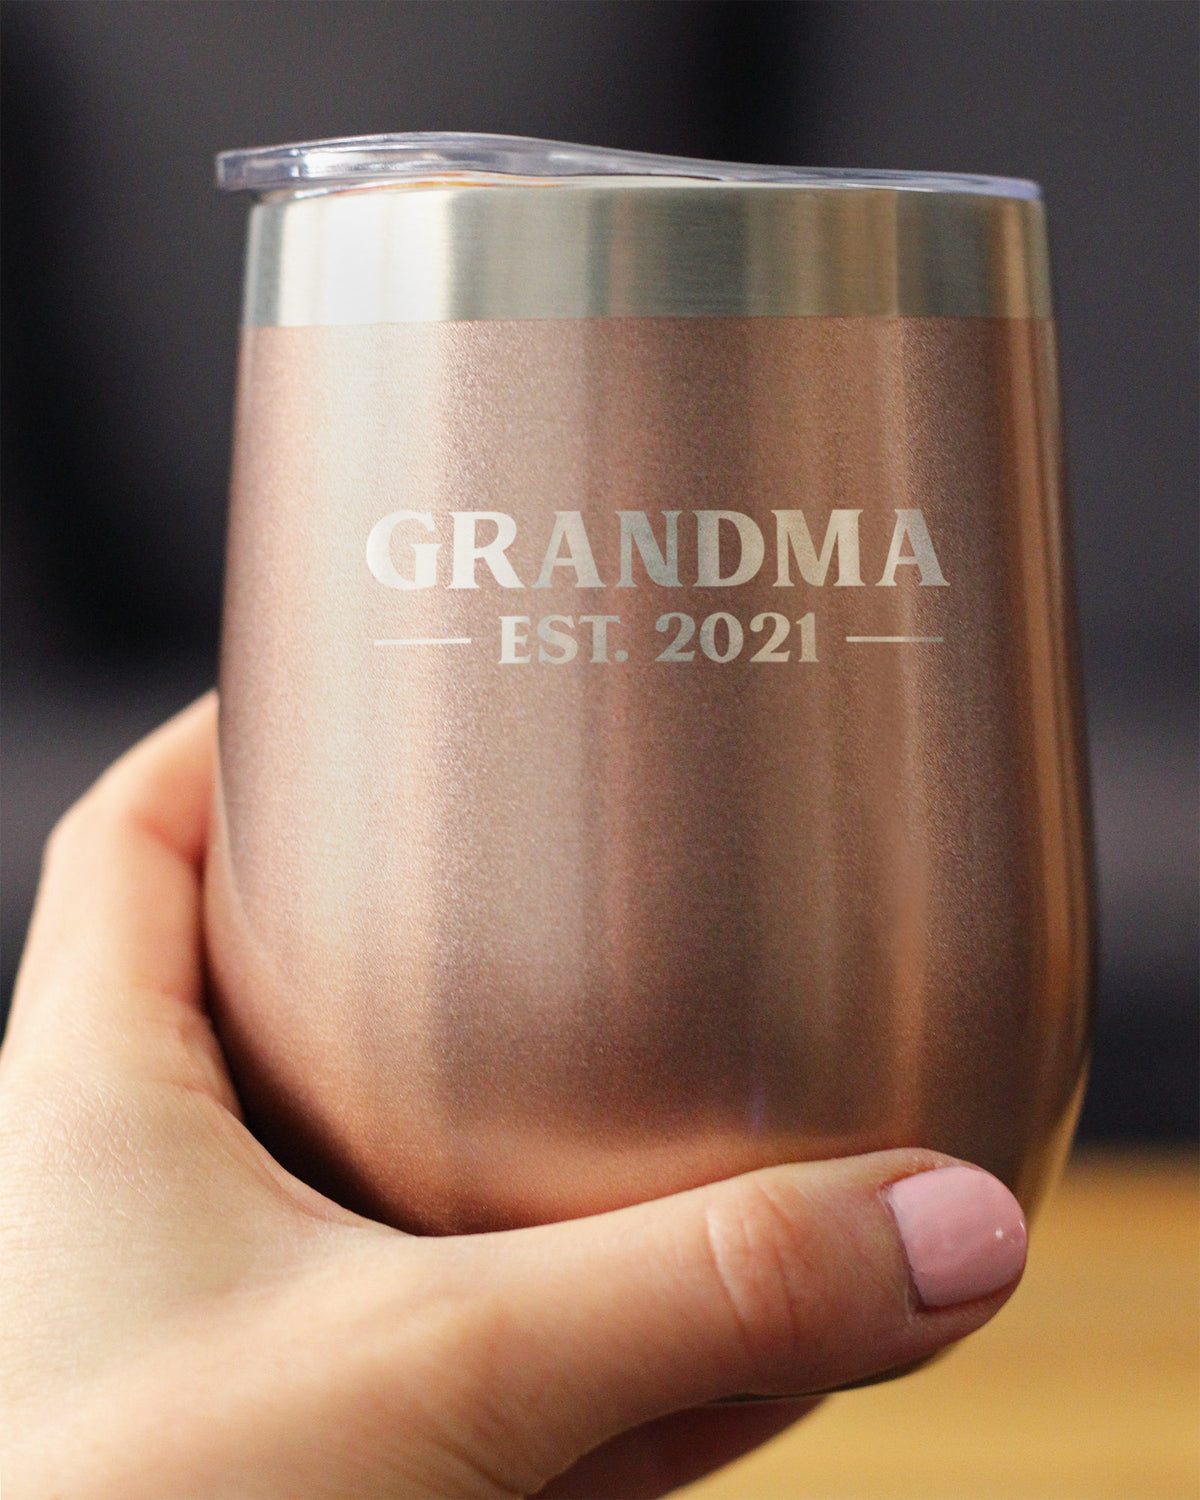 Grandma Est 2021 - Wine Tumbler with Sliding Lid - Stemless Stainless Steel Insulated Mug - Bold Outdoor Camping Gift